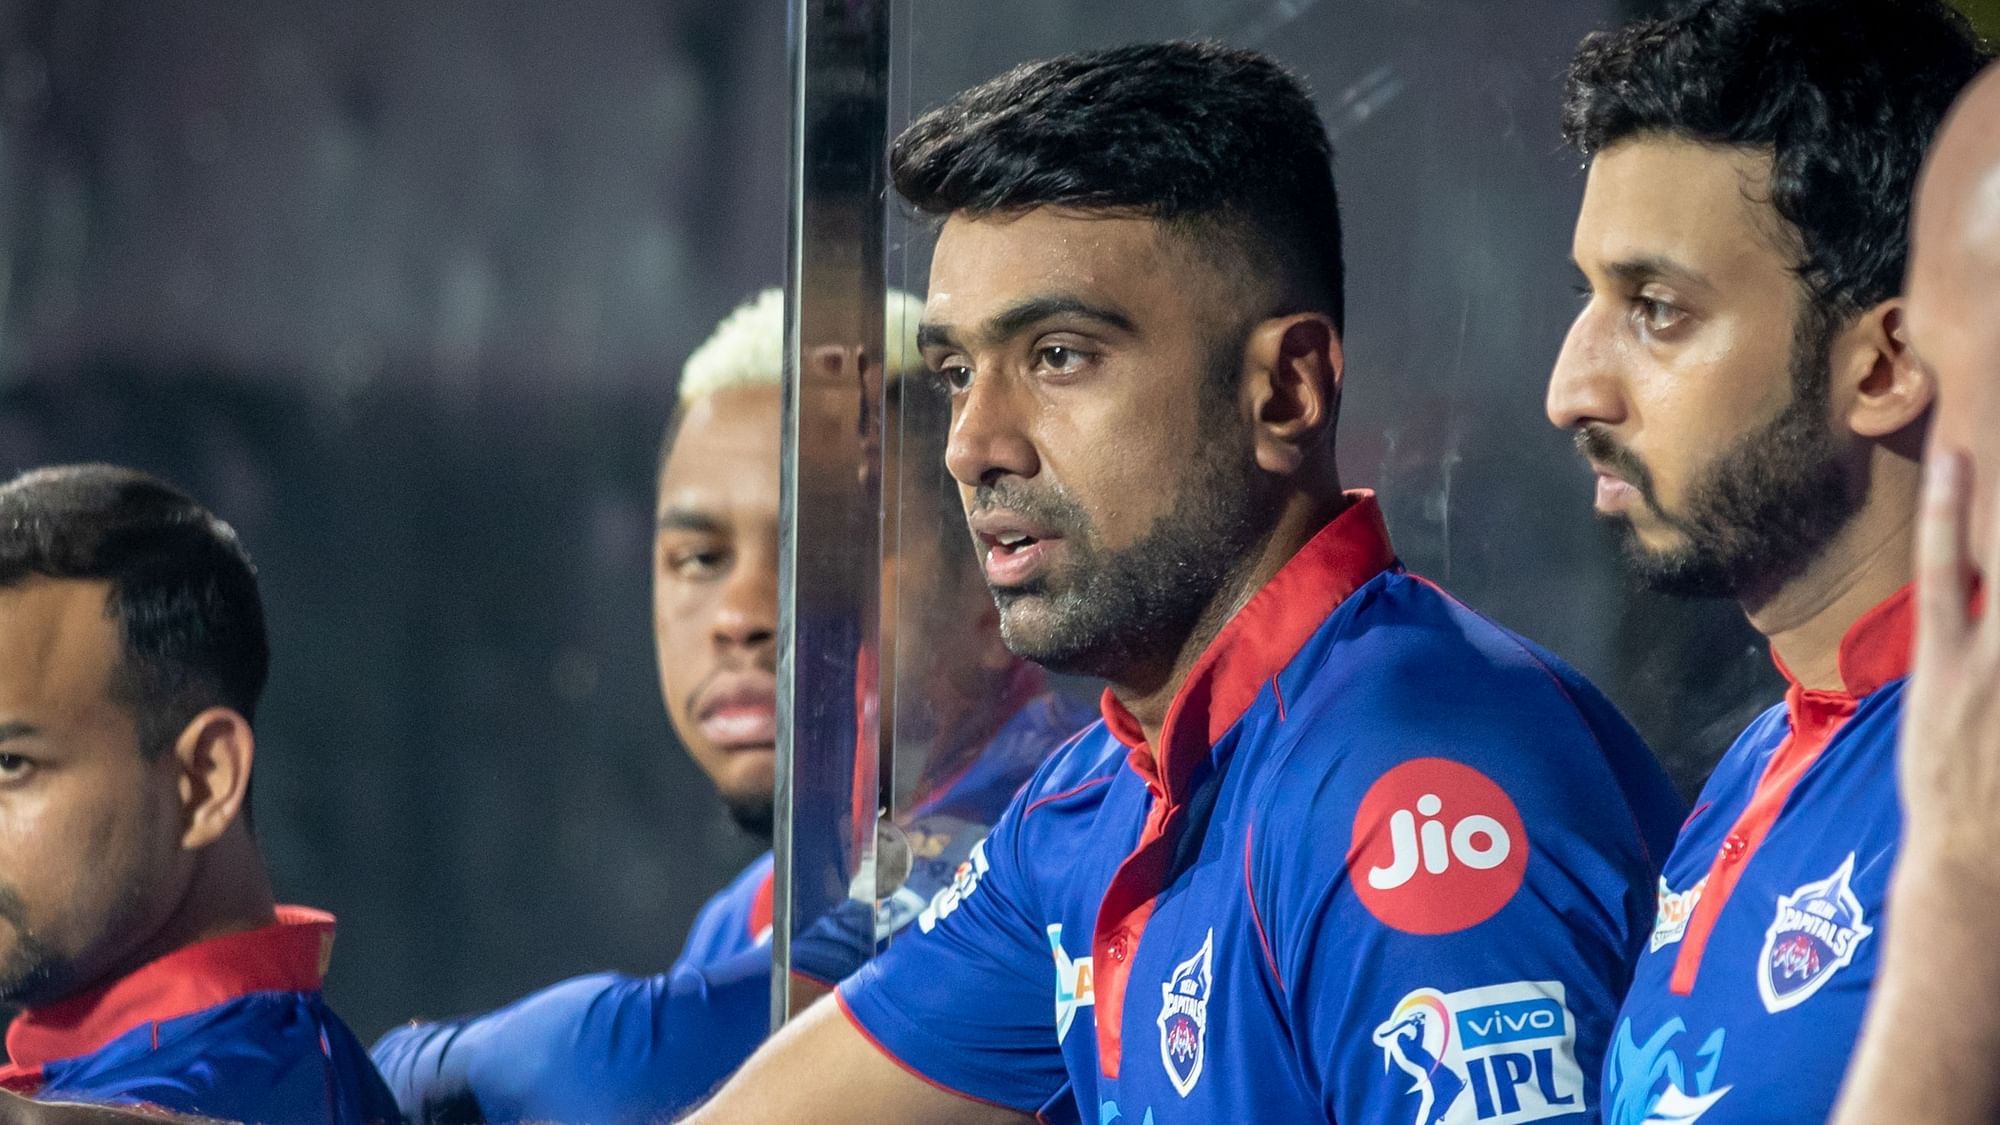 Ashwin has said he will be exiting the IPL and may return at a later date.